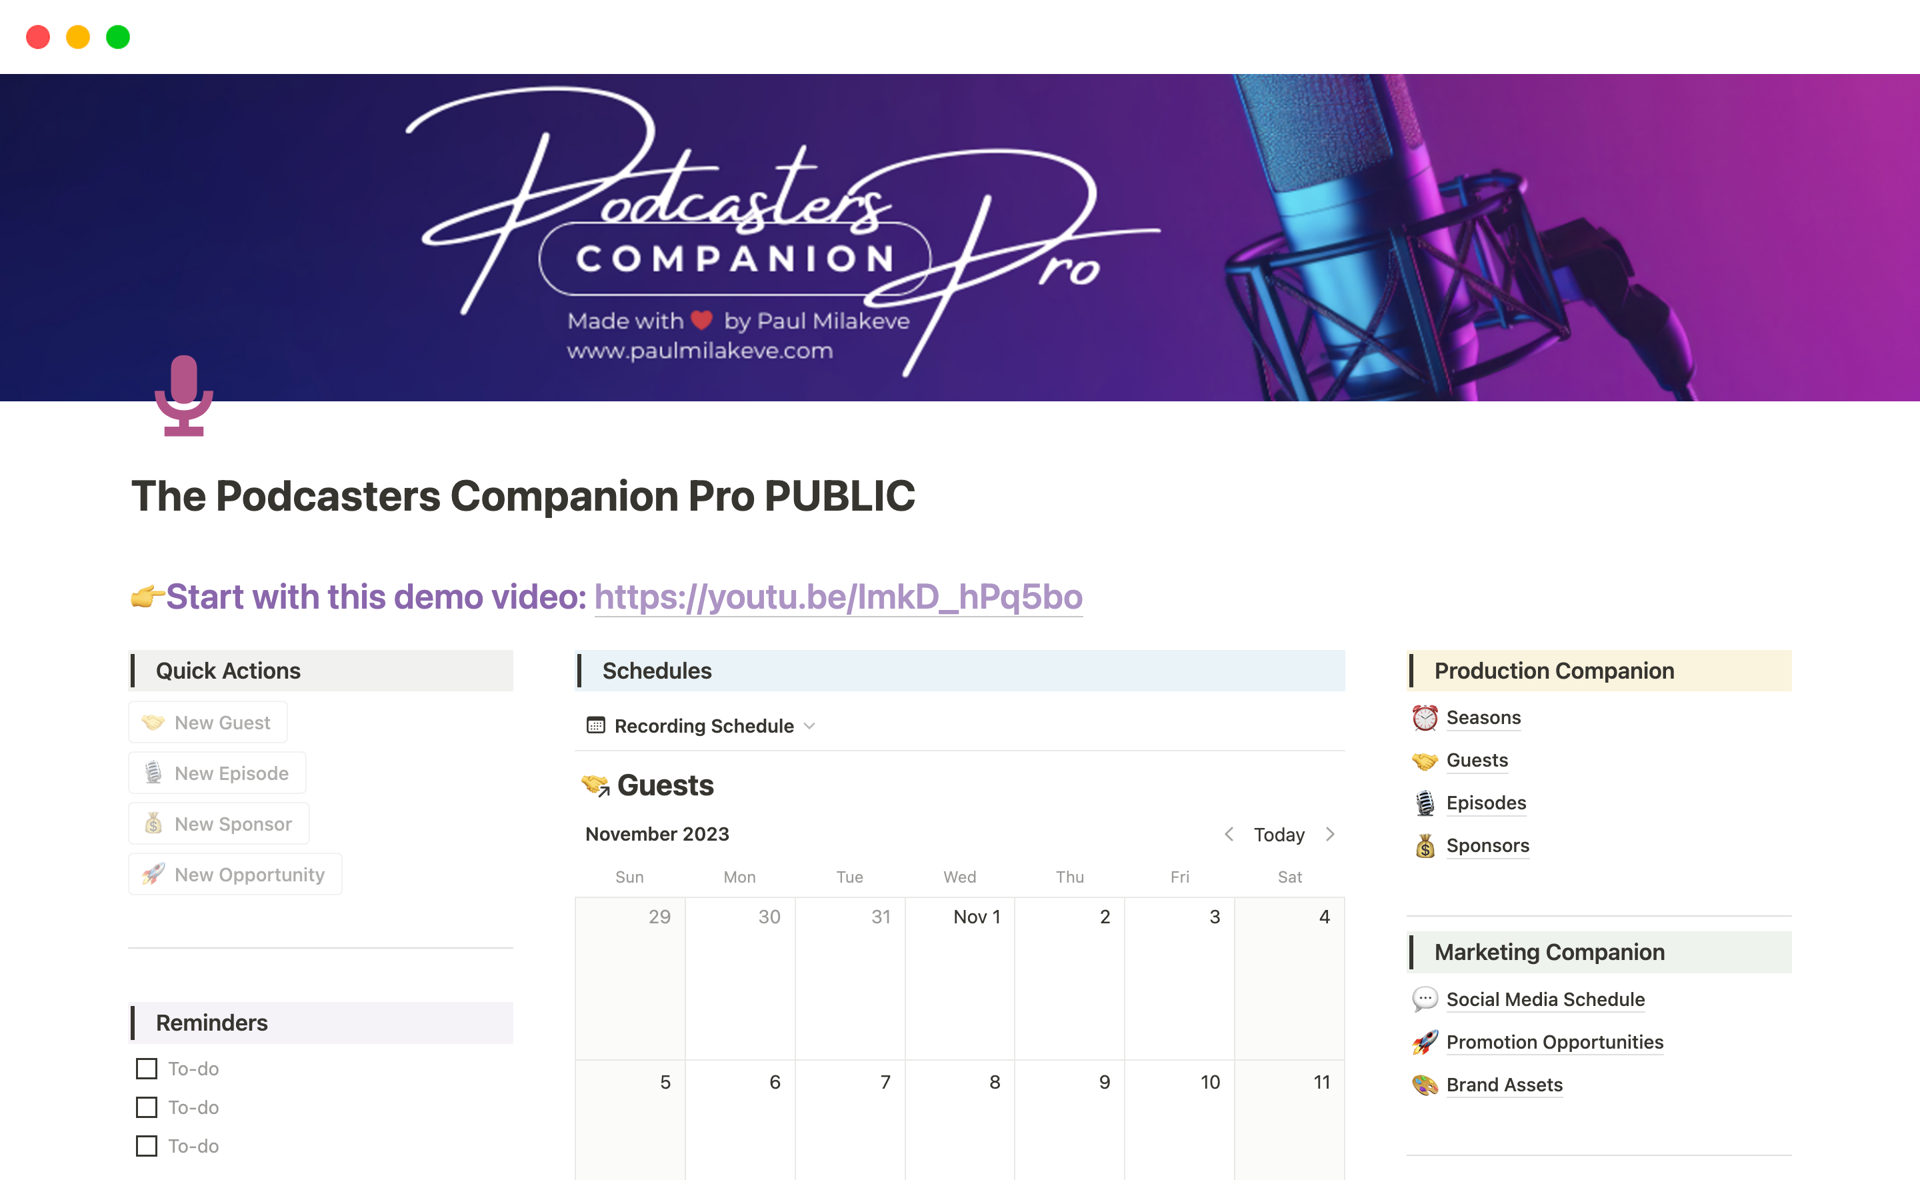 The Podcasters Companion is your all-in-one companion to help you build, produce, promote, monitor and evaluate your entire podcast.